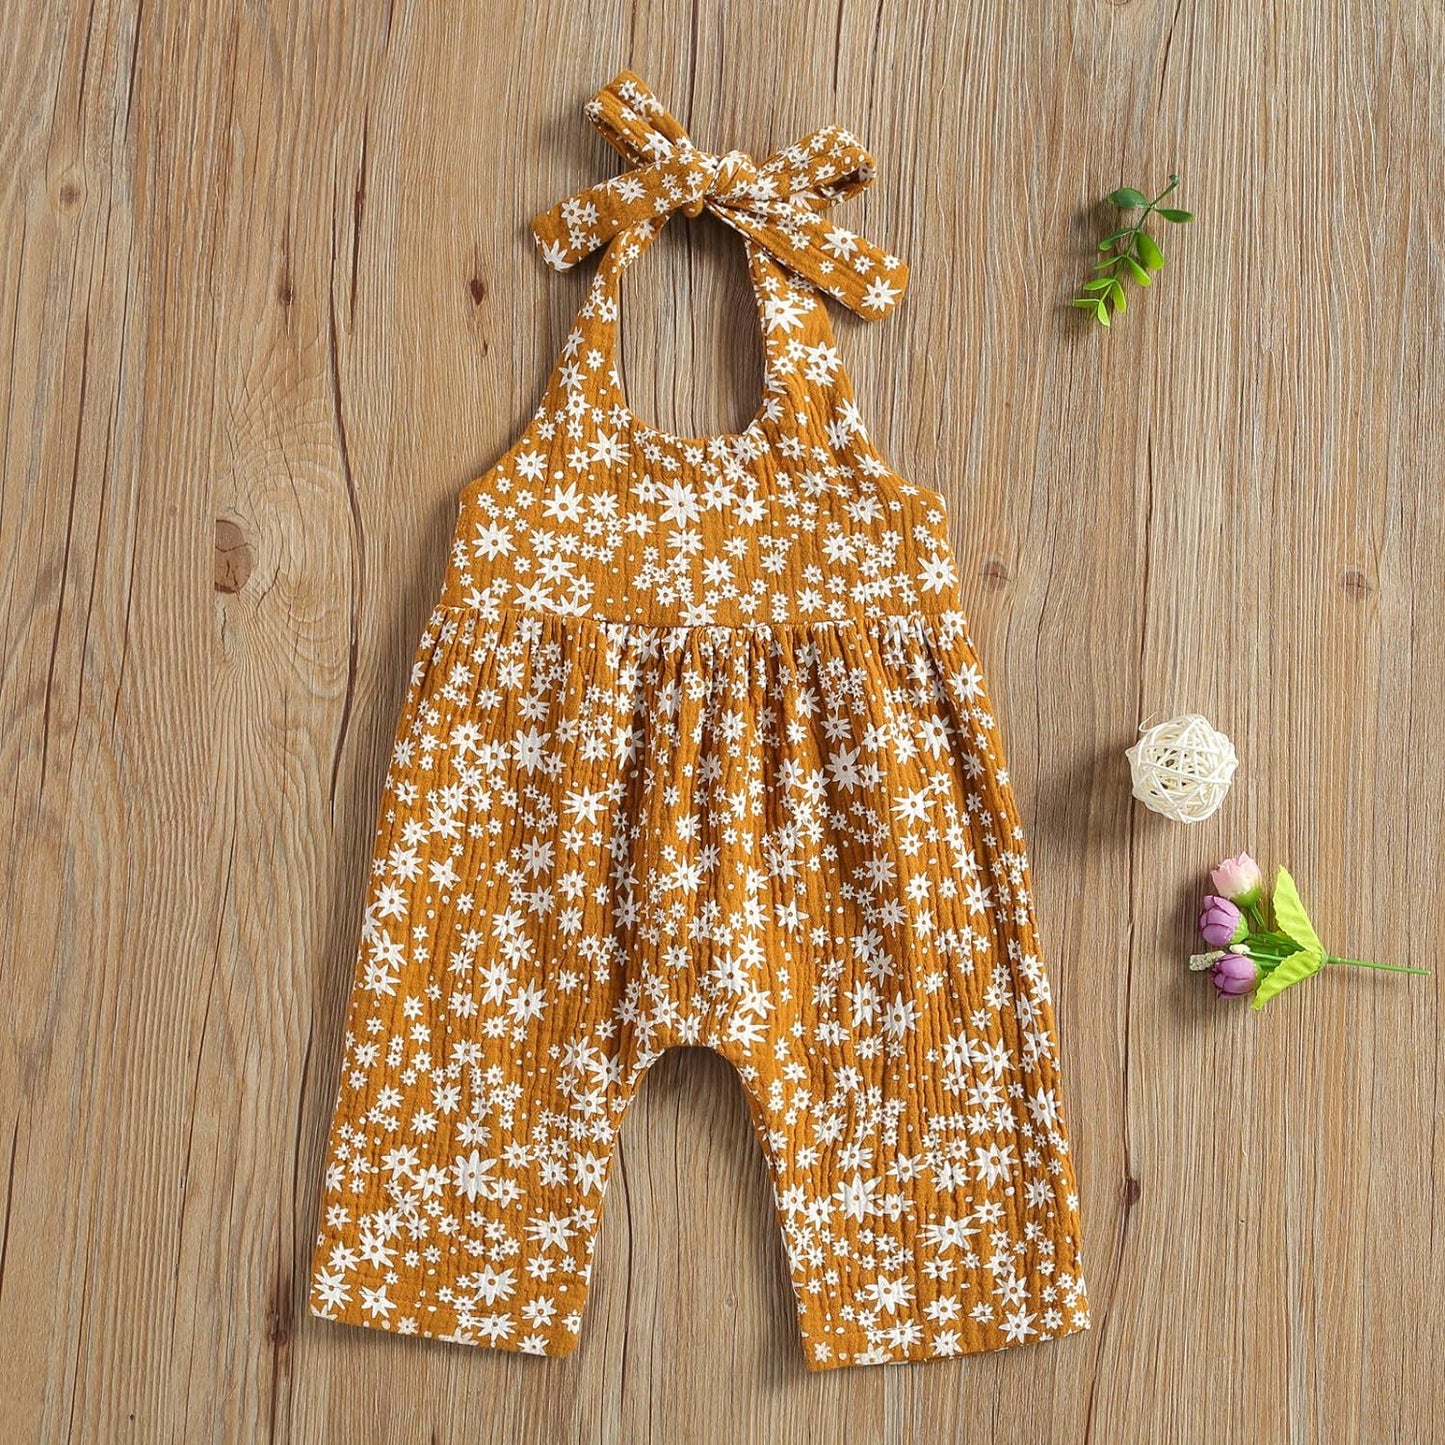 Infant Summer Clothes: Professional Daisy Print Halter Romper Set with Bodysuit, Headband, and Floral Jumpsuit for Baby Girls